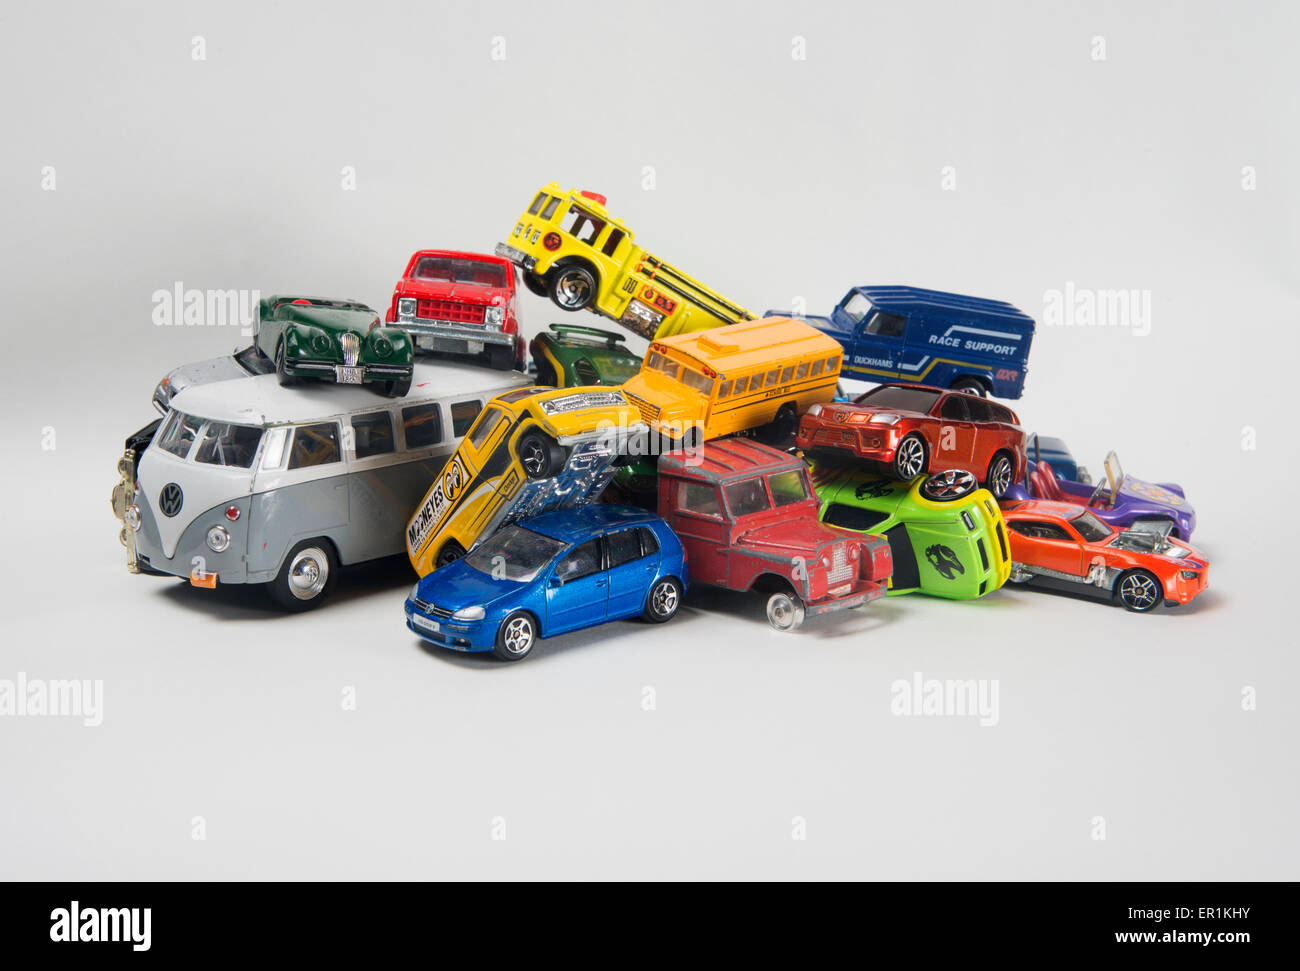 Pile of toy cars Stock Photo